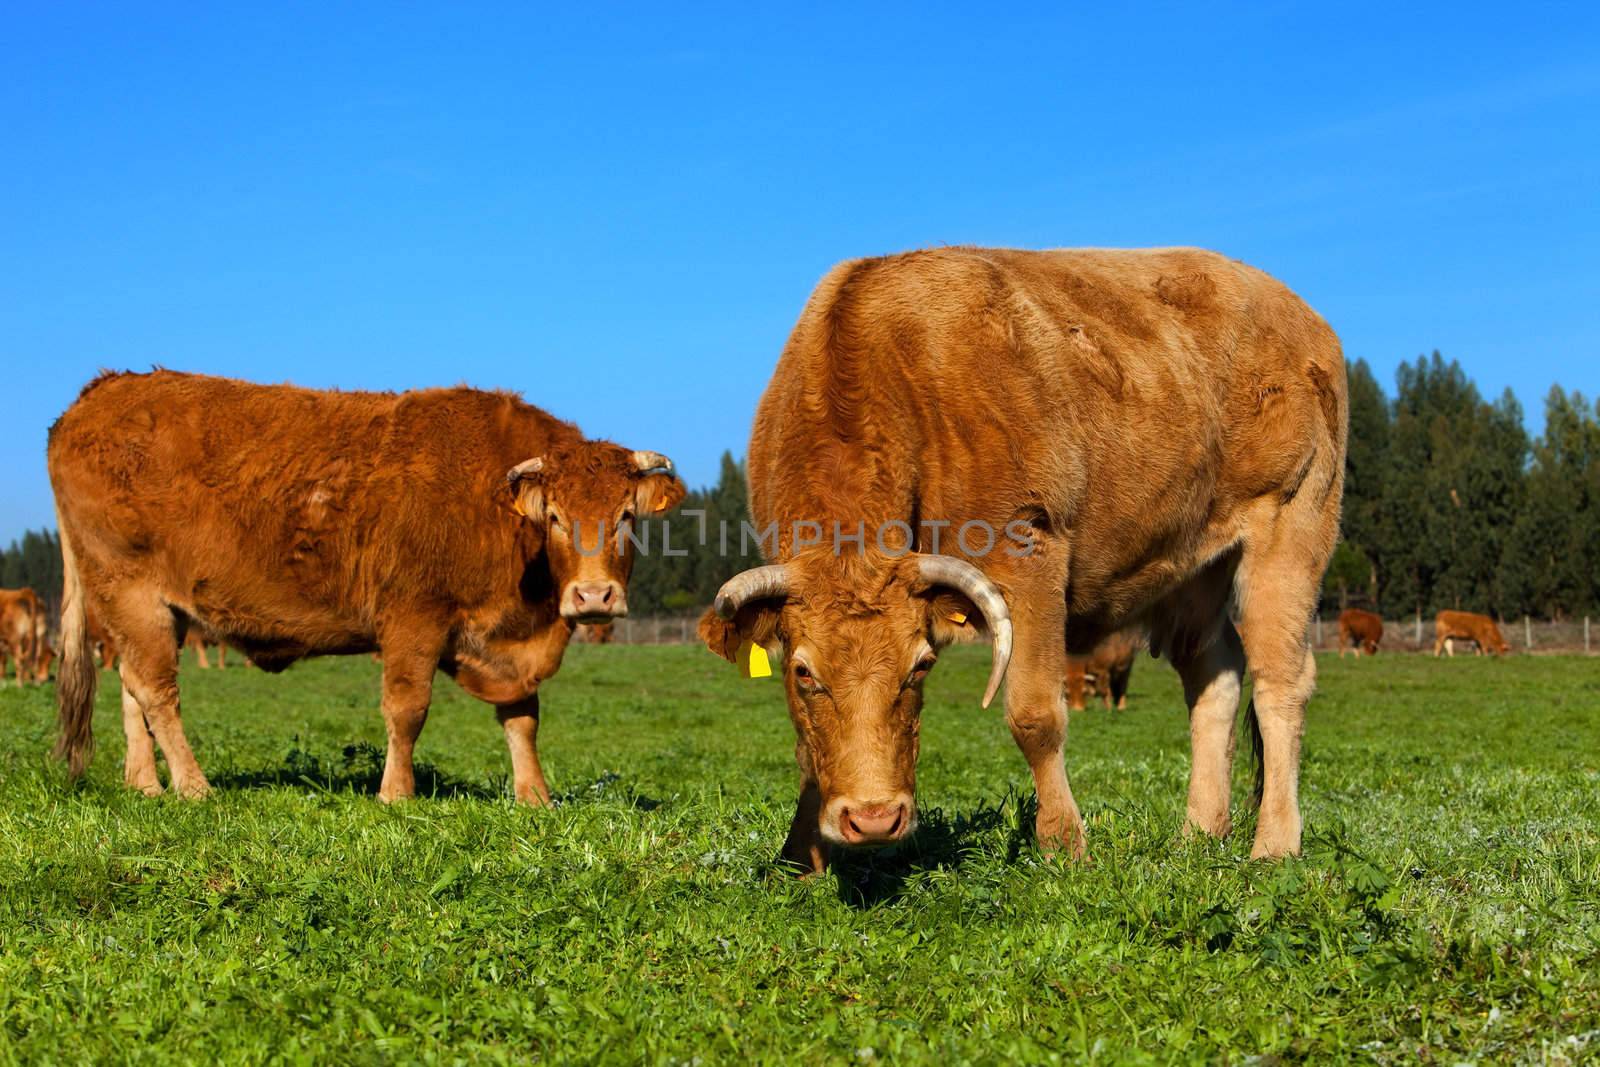 Two cow  on a green lawn
